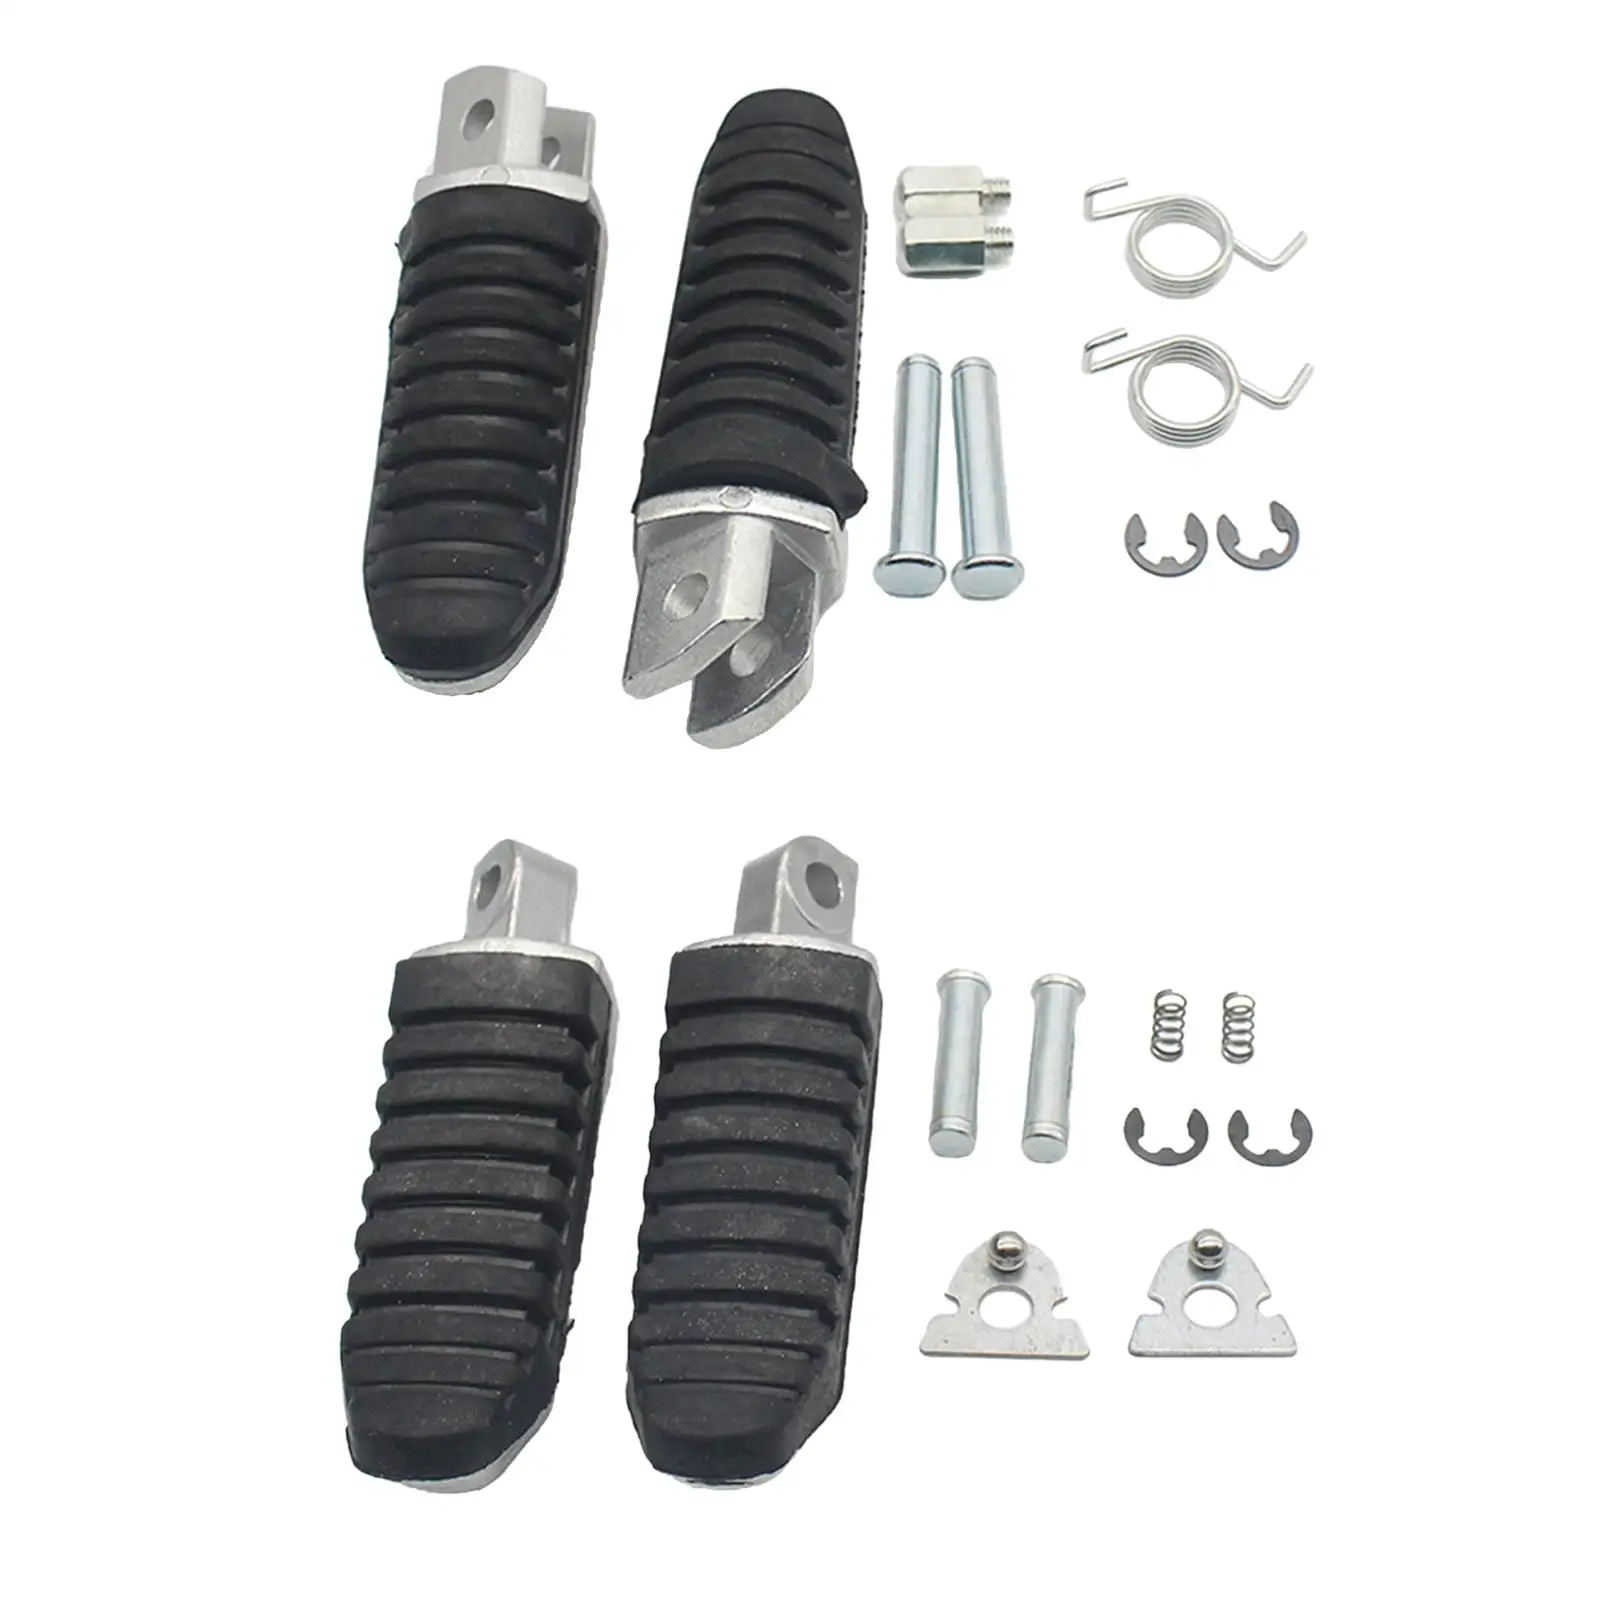 Aluminum Motorcycles Foot Pegs Foot Rest Pedals for Suzuki 650F, Motorcycle